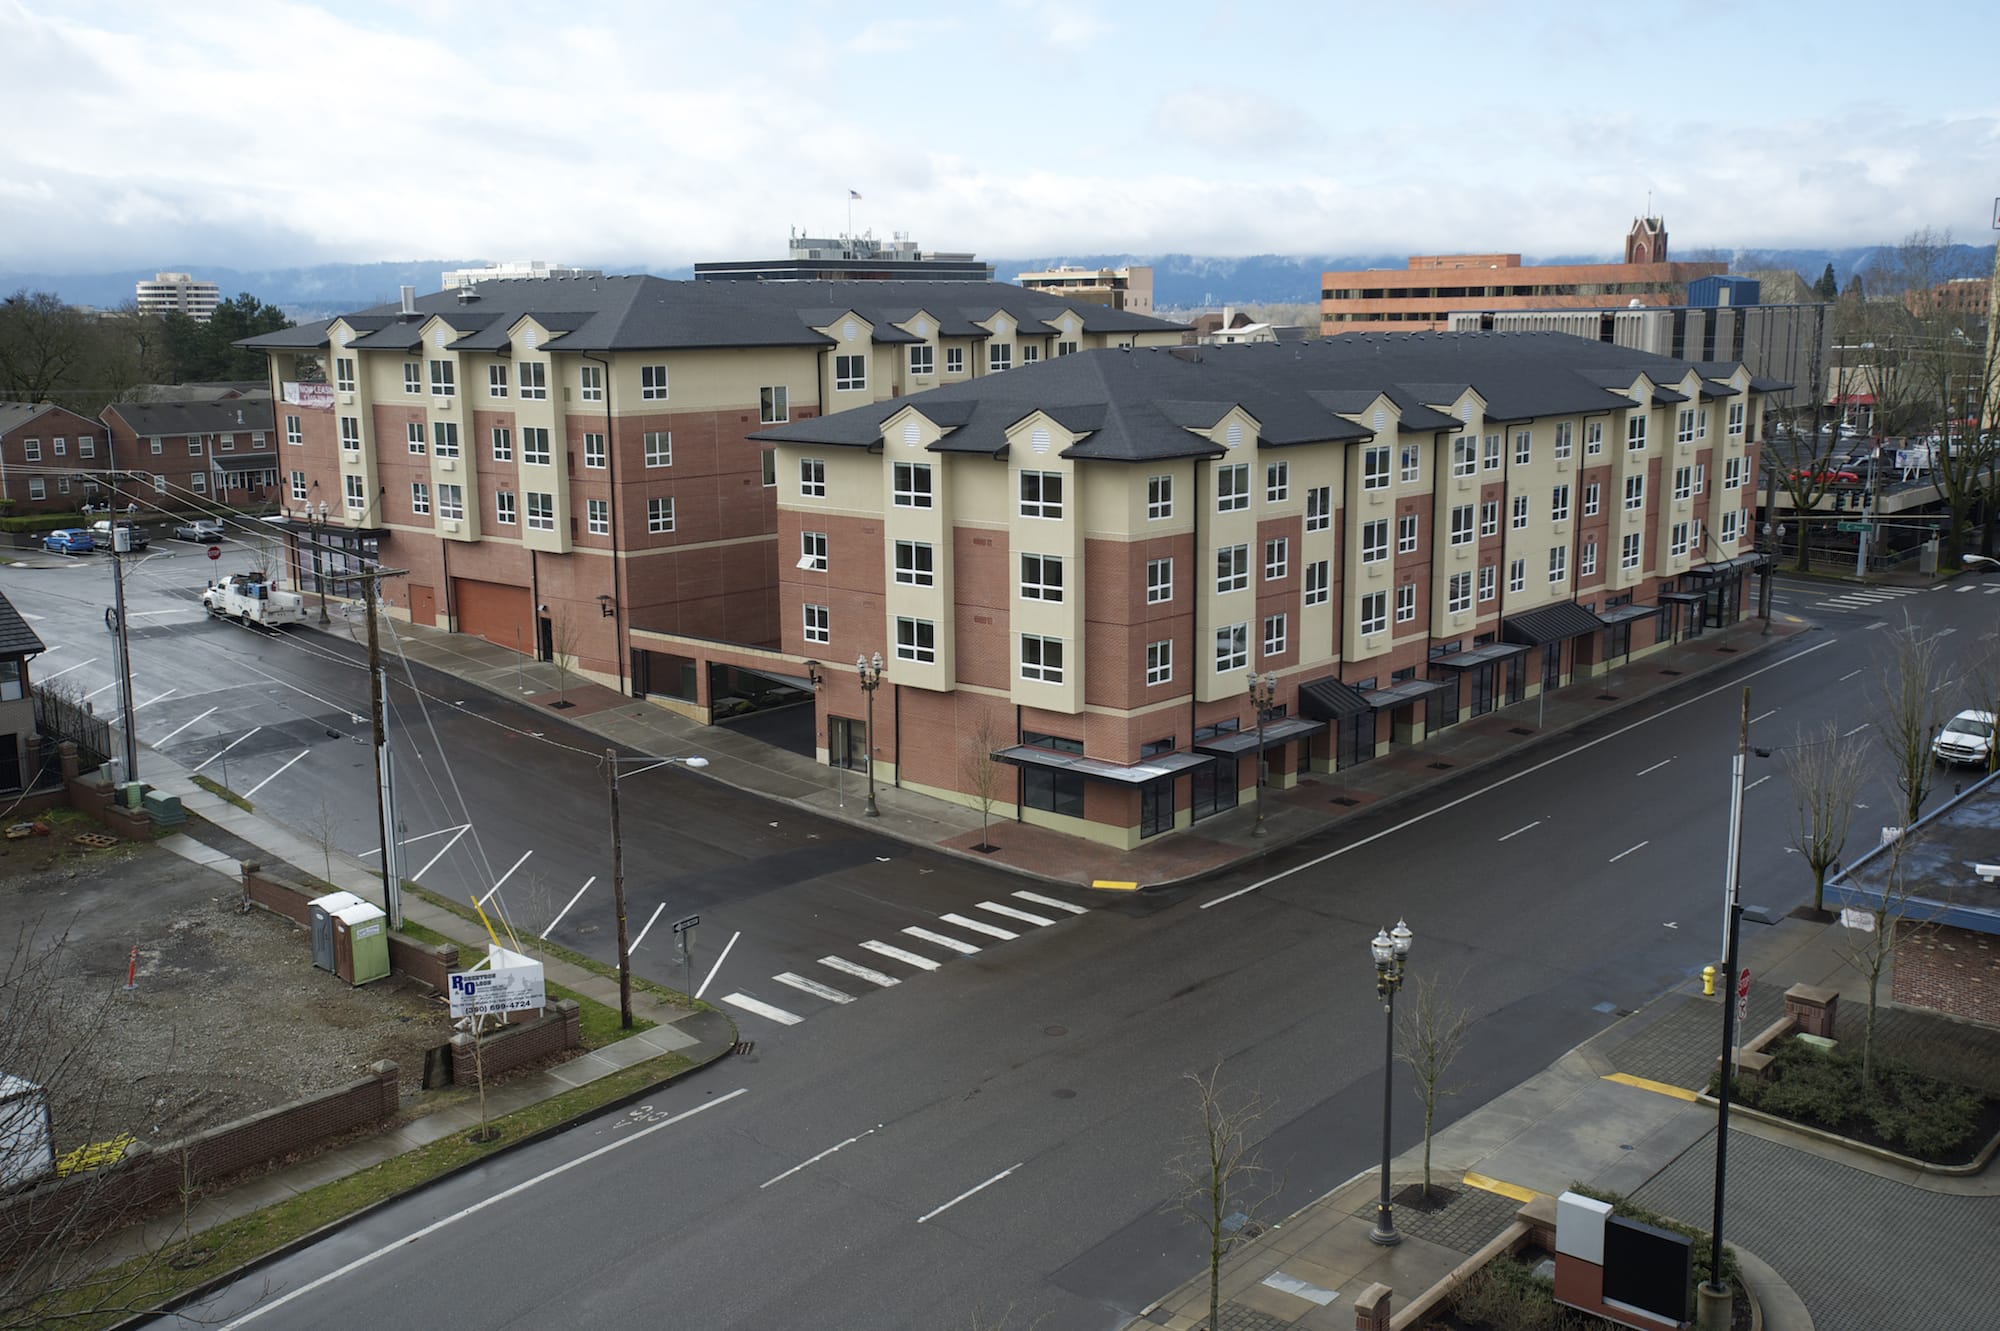 The Prestige Plaza apartment complex, recently completed and about one-third leased, is being offered for sale for $24 million.